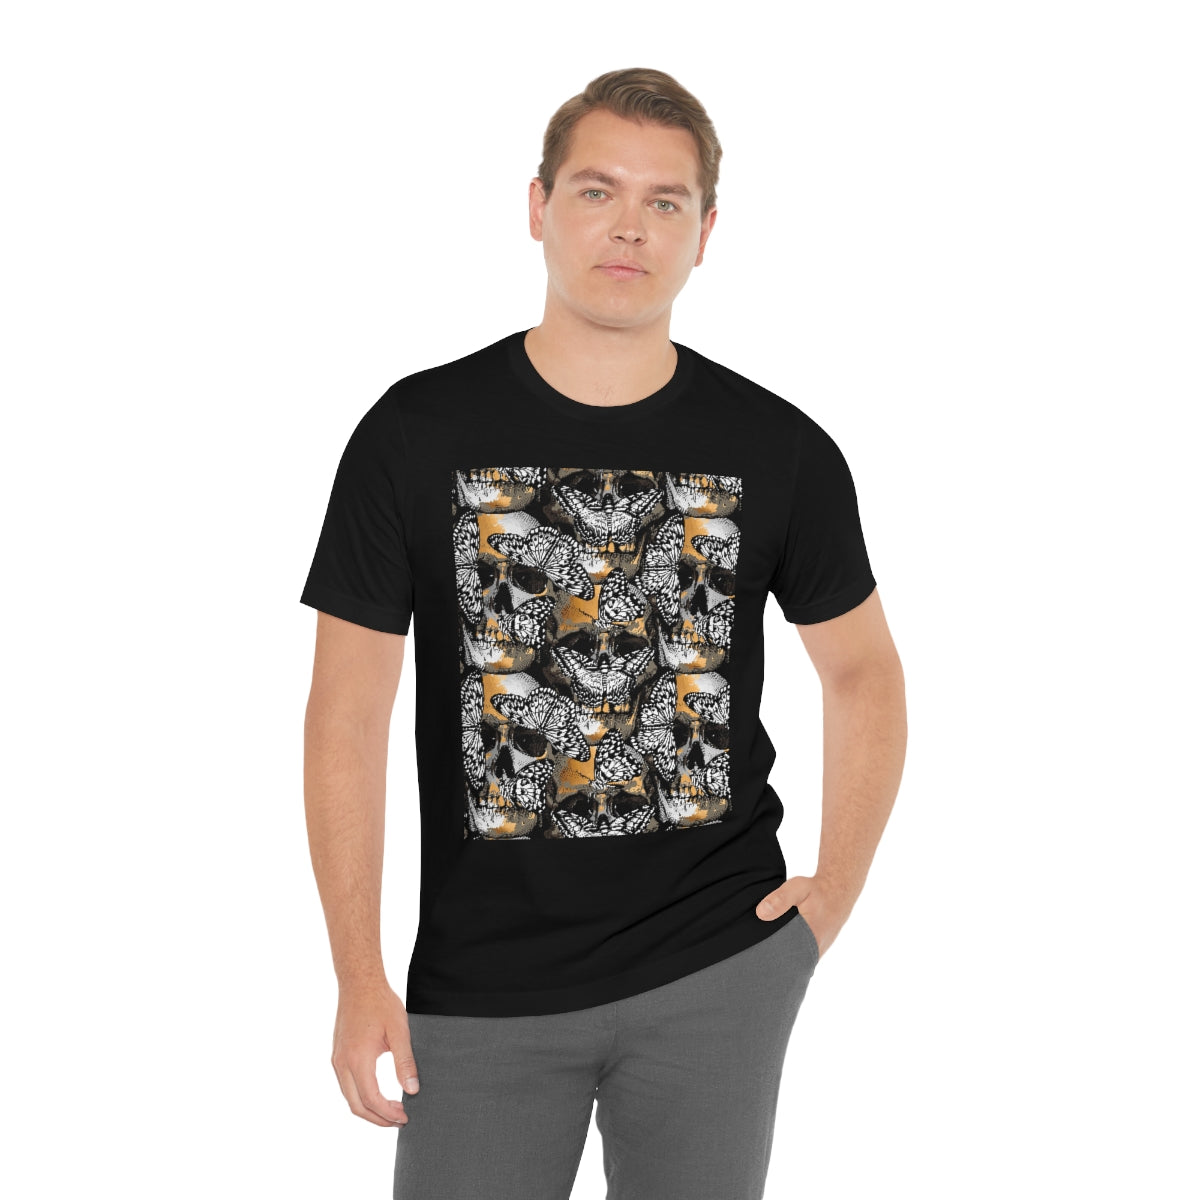 Unisex Jersey Short Sleeve Tee "Gold and silver Human skulls with & Butterflies"